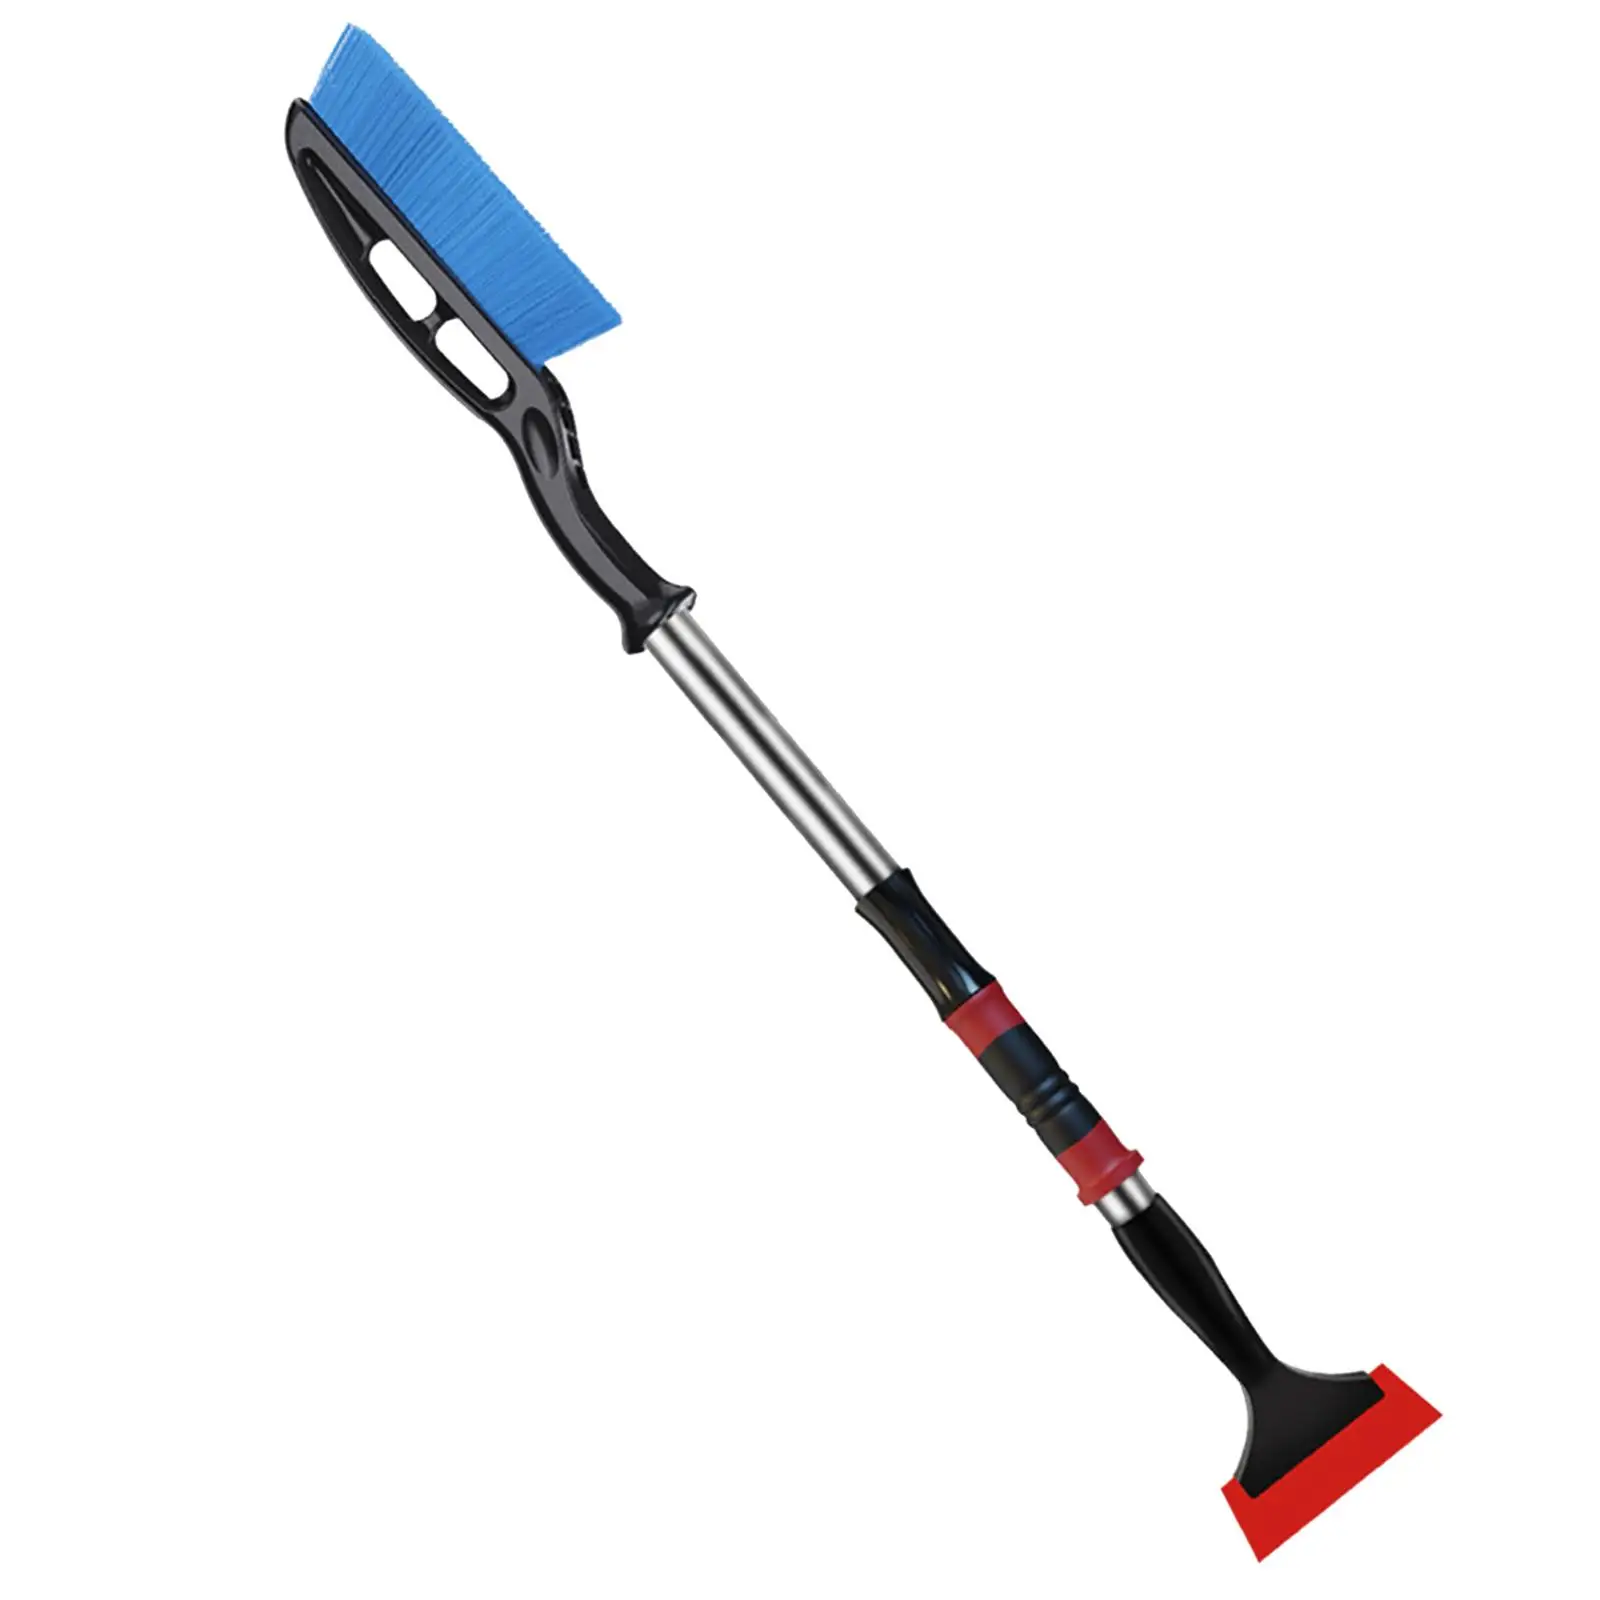 Car Snow Removal Brush Shovel Universal with Grip Telescopic Rod Snow Cleaning